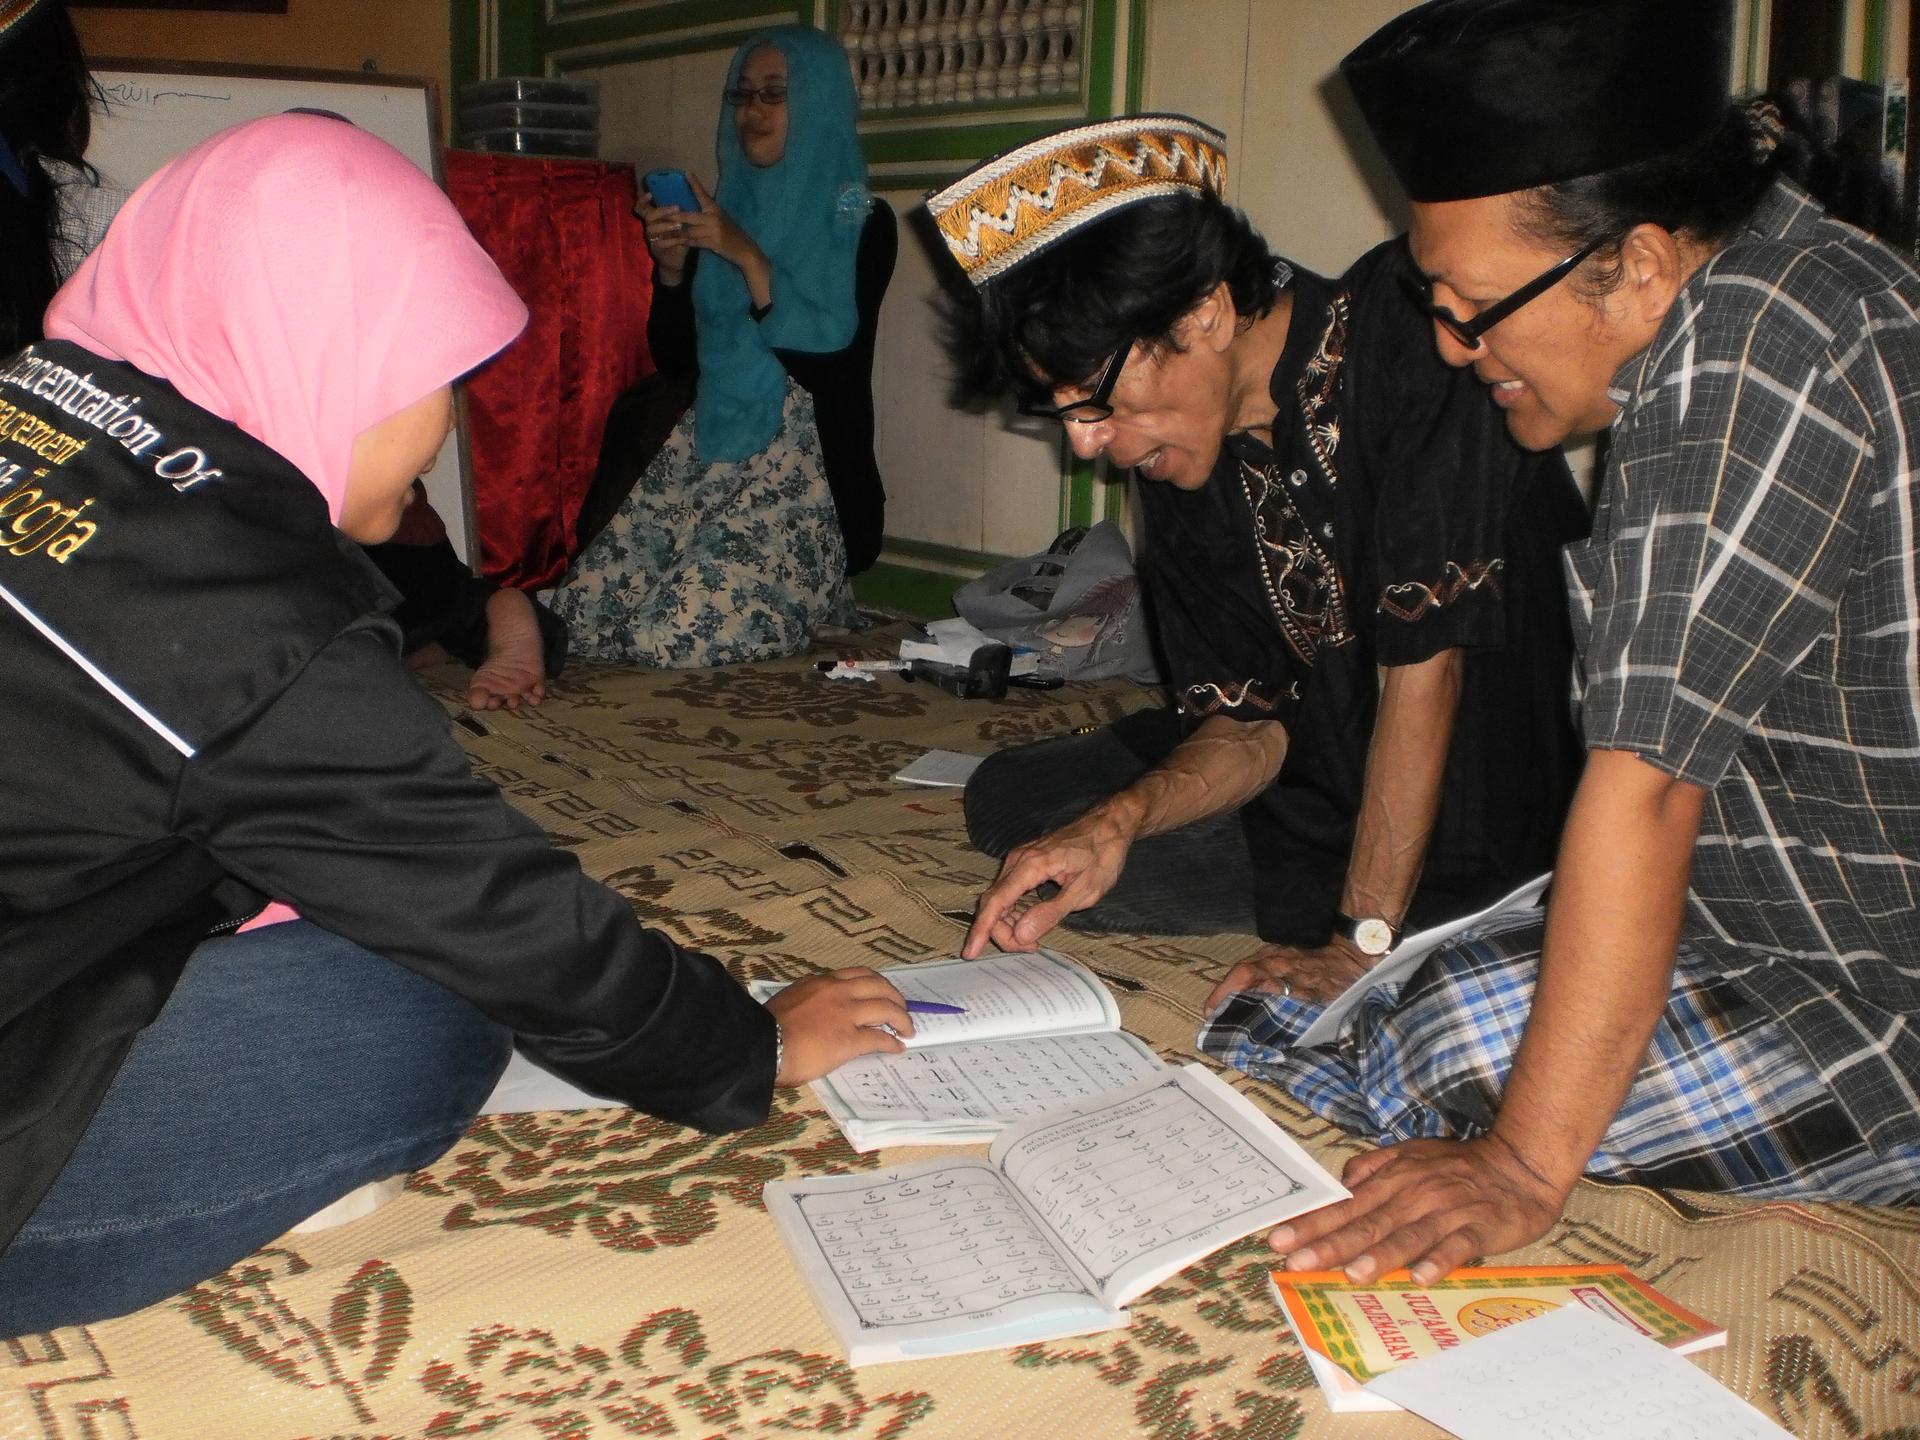 Transgender women study during an Arabic class at the Pondok Pesantren Waria Islamic school in Indonesia. Bunda Yeti, wearing a plaid shirt (at right), says the school has given her a place to practice her faith free of worry.